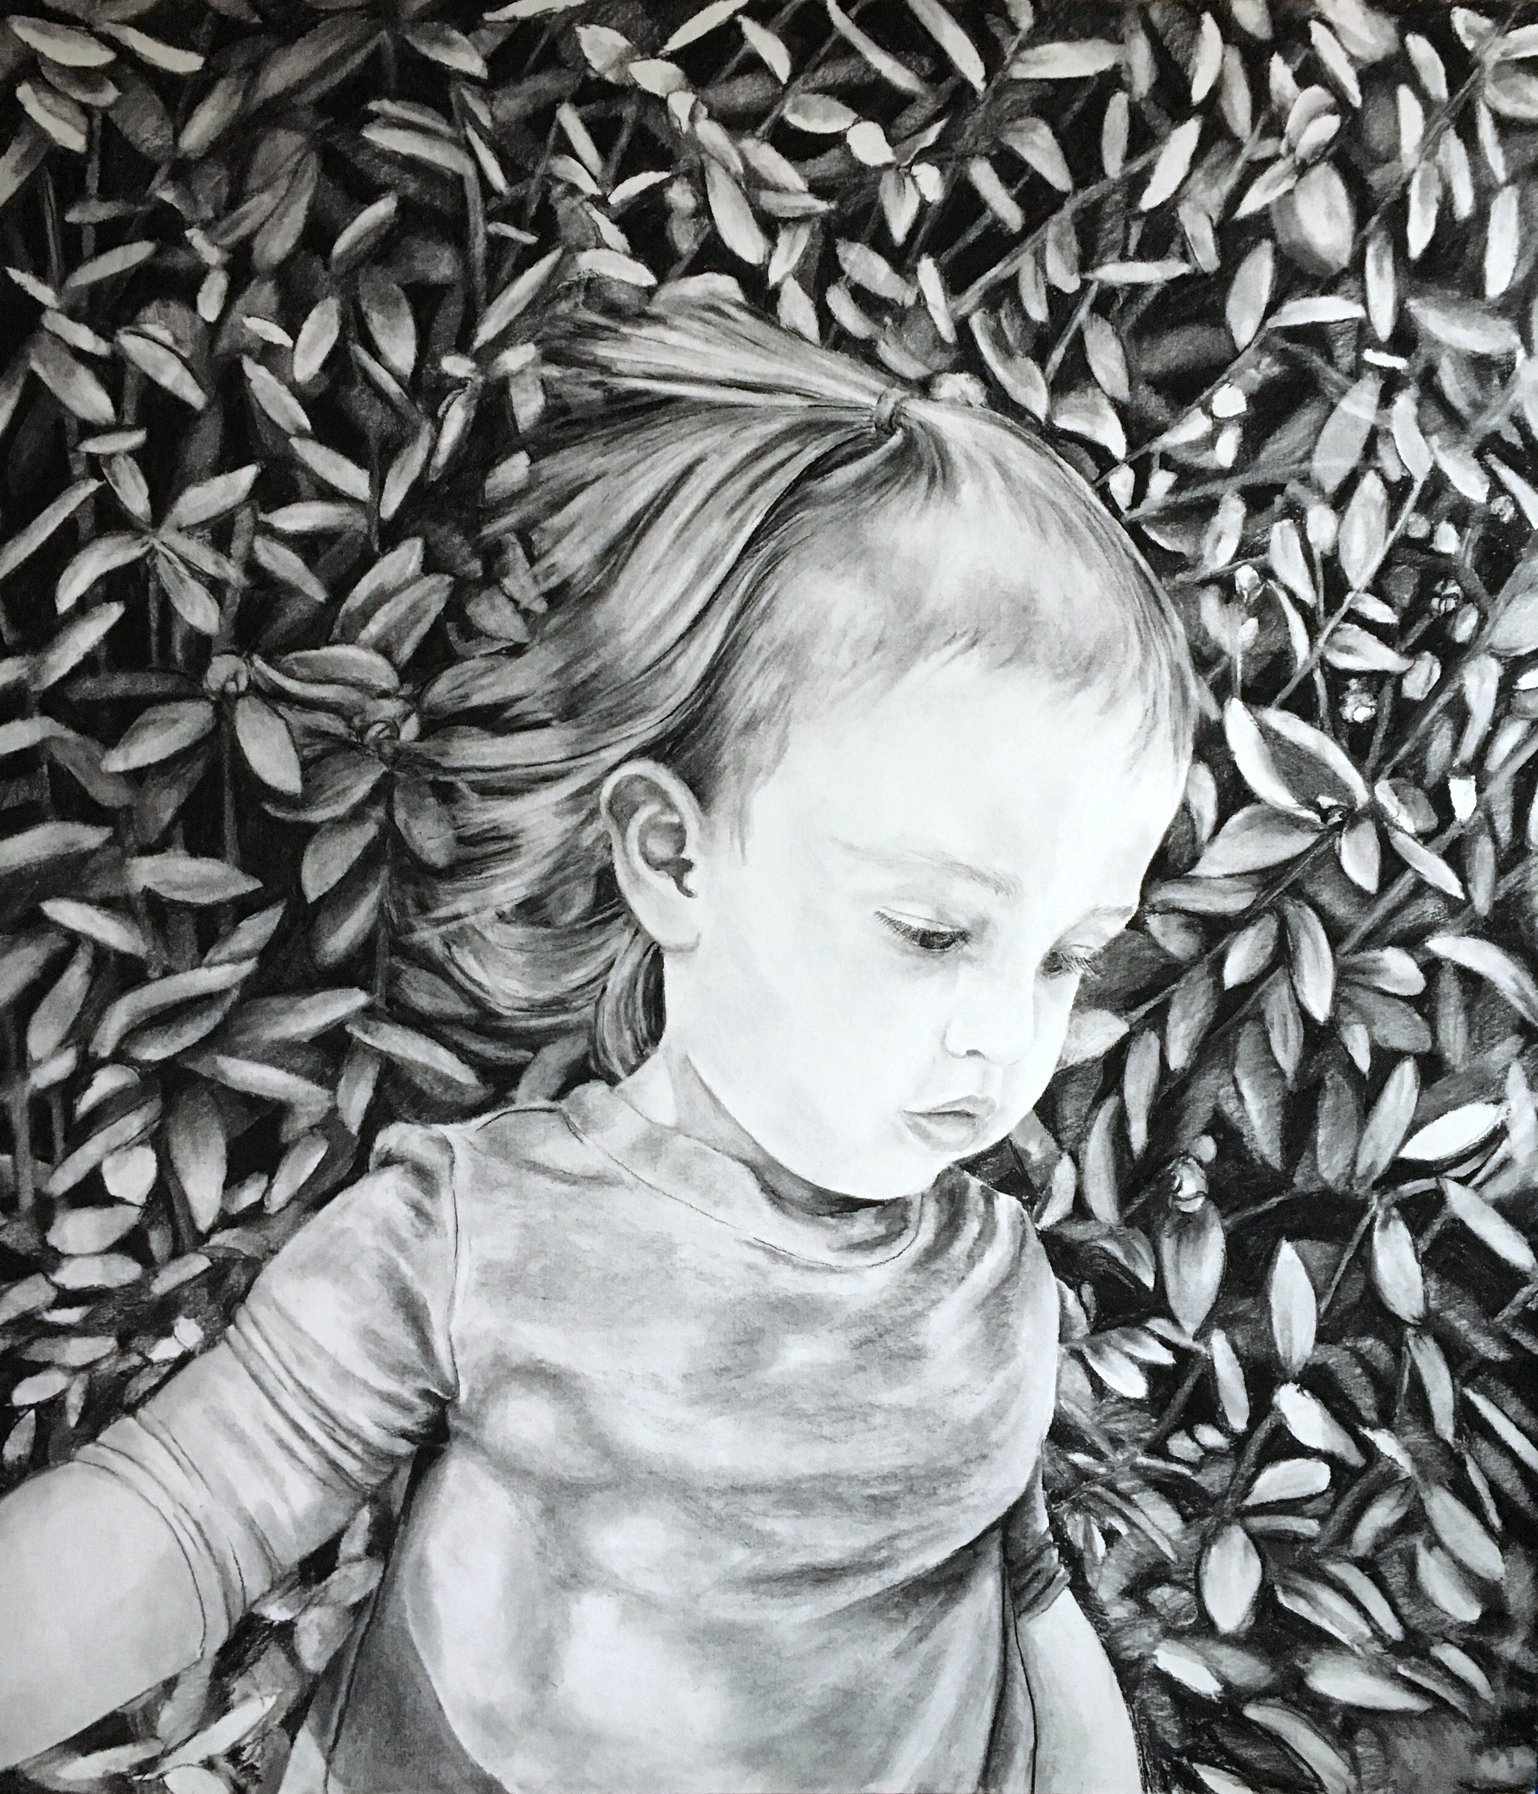   Aurilla , charcoal on paper, 36.5” x 42”, 2016. 